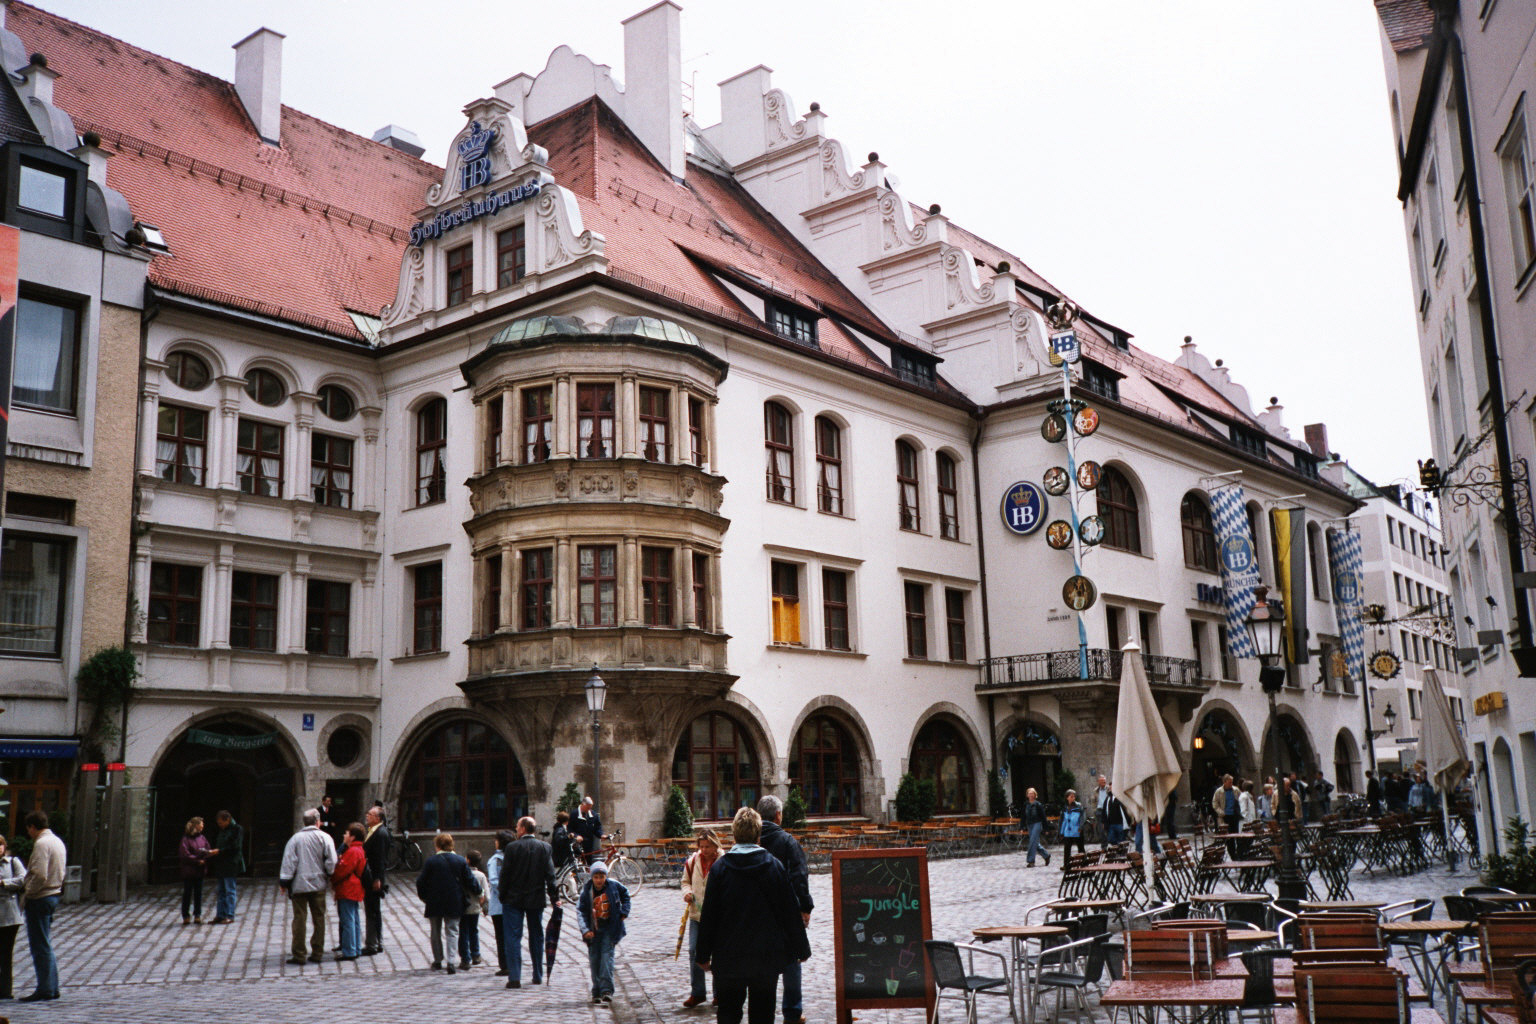 Hofbrauhaus - Top 10 Things to See and Do in Munich, Germany